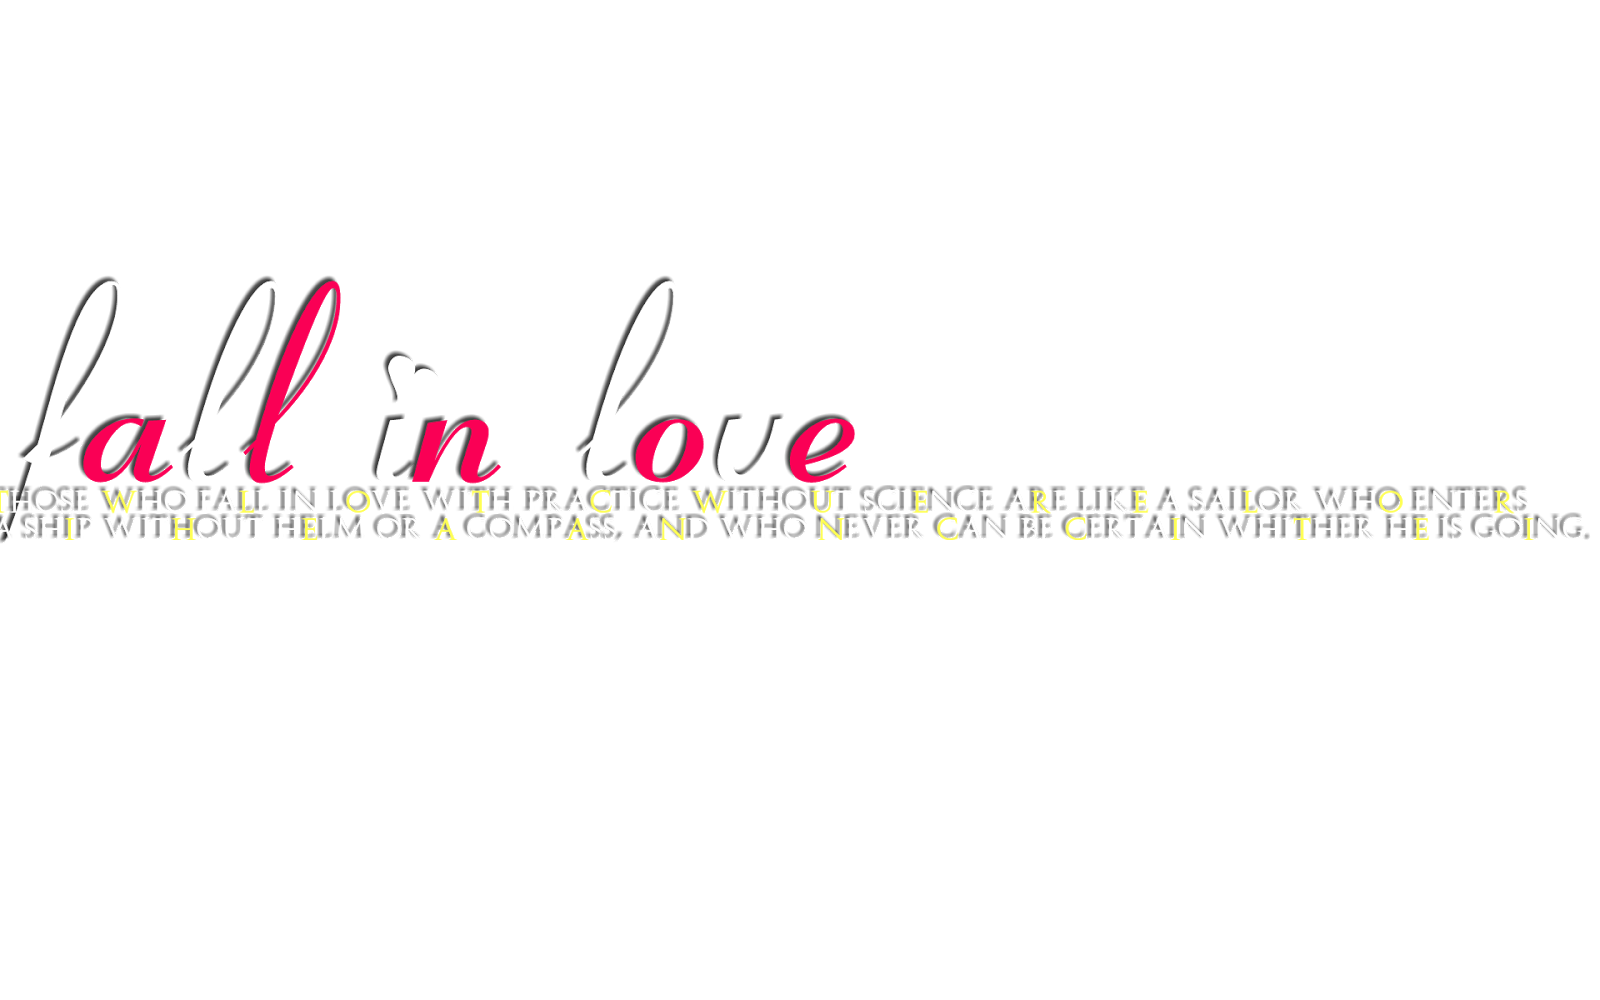 Love Text Png - Love Text Picture Png Image, Transparent background PNG HD thumbnail